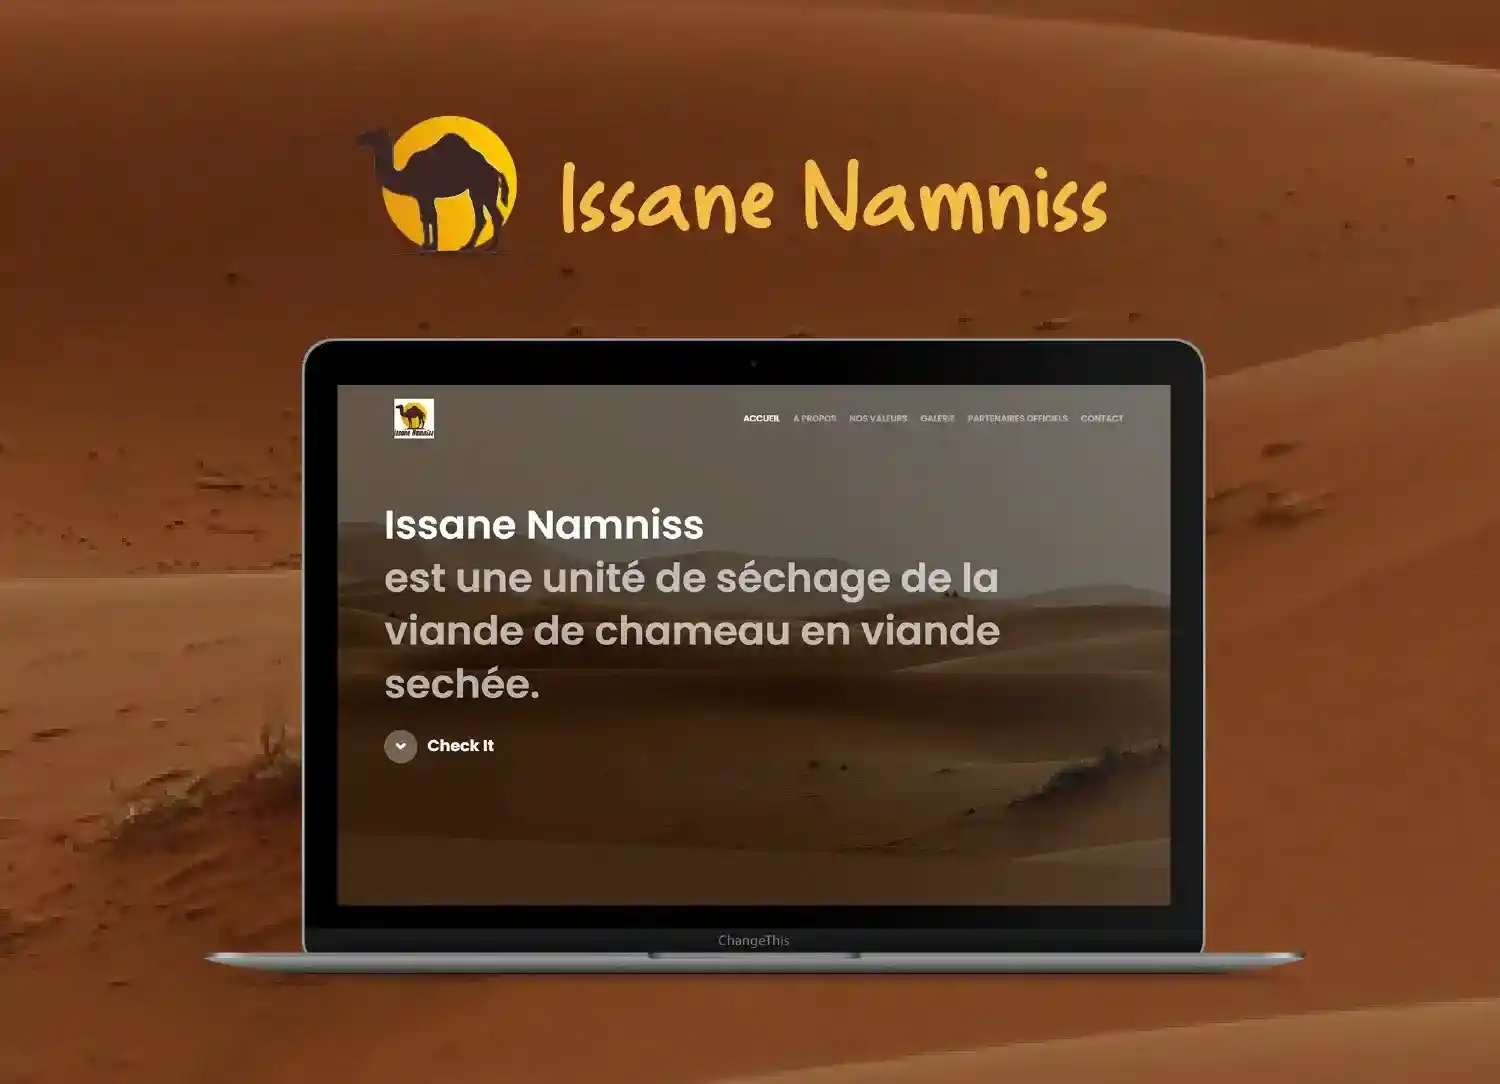 laptop screen show for the website of Issane Namniss project